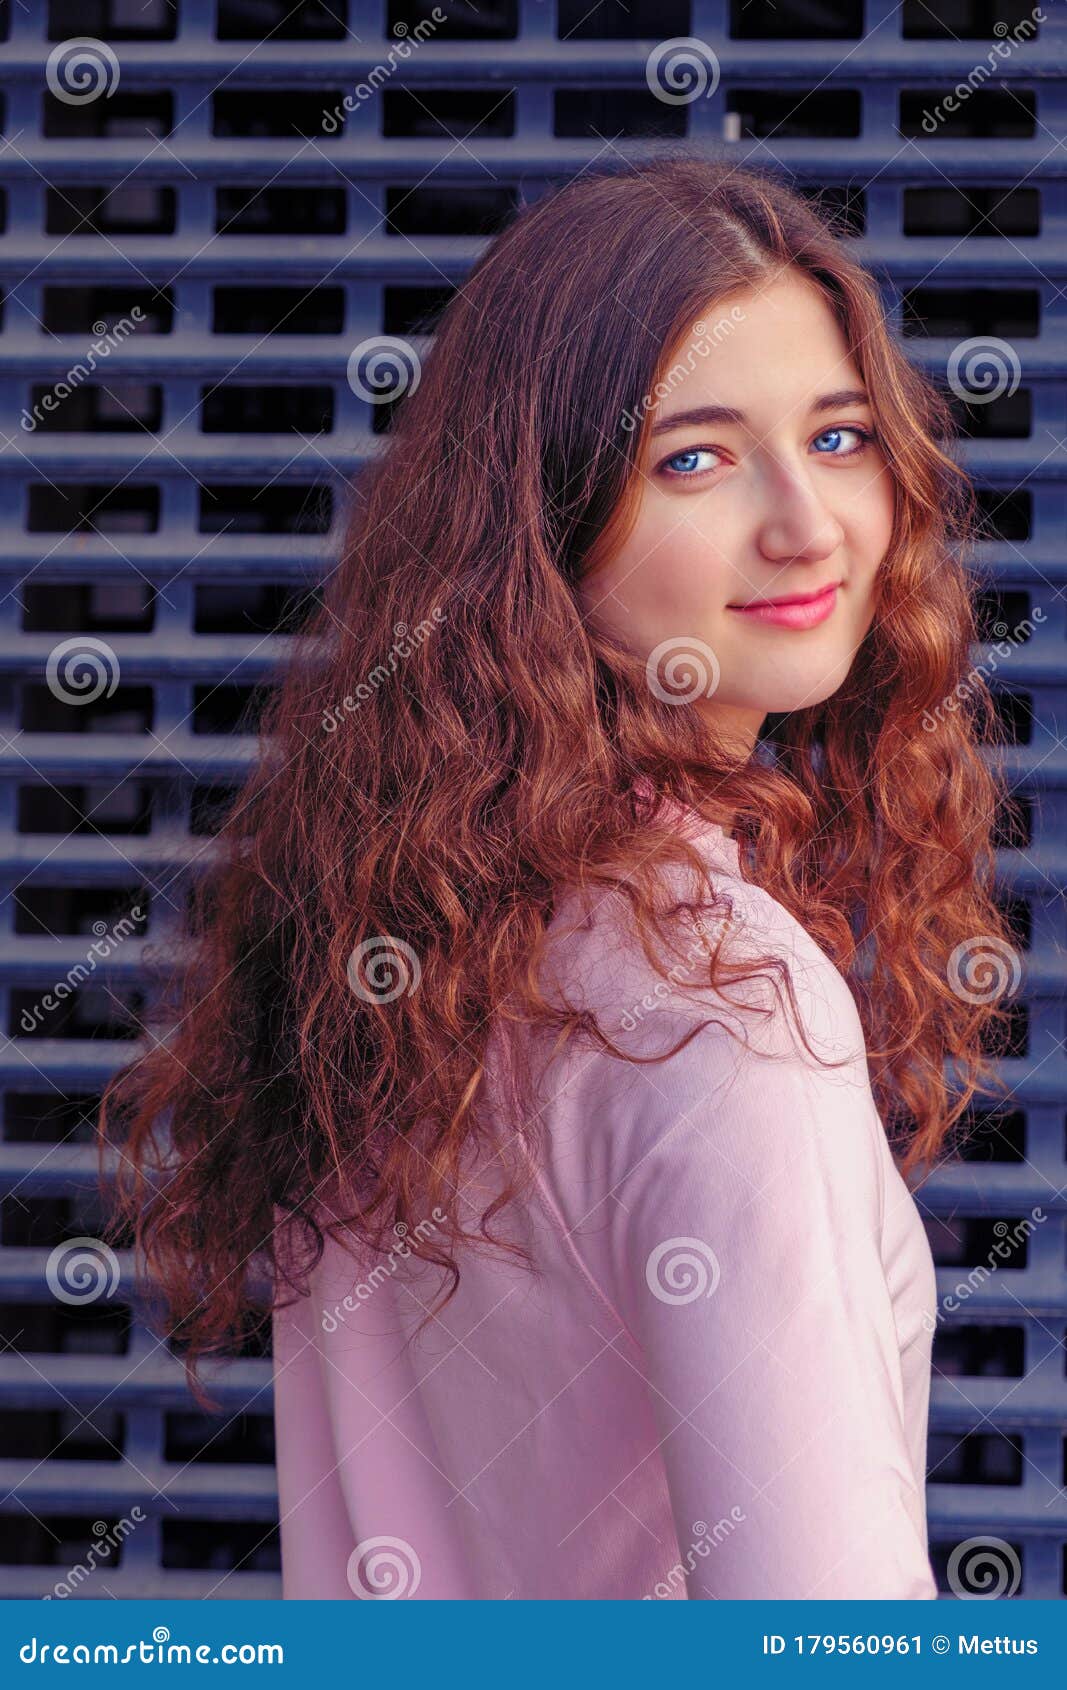 The Girl with Long Curly Brown Hair Turns To the Camera and Looks Straight  Ahead. she Stands in Front of an Iron Grating Stock Image - Image of  outdoor, lifestyle: 179560961